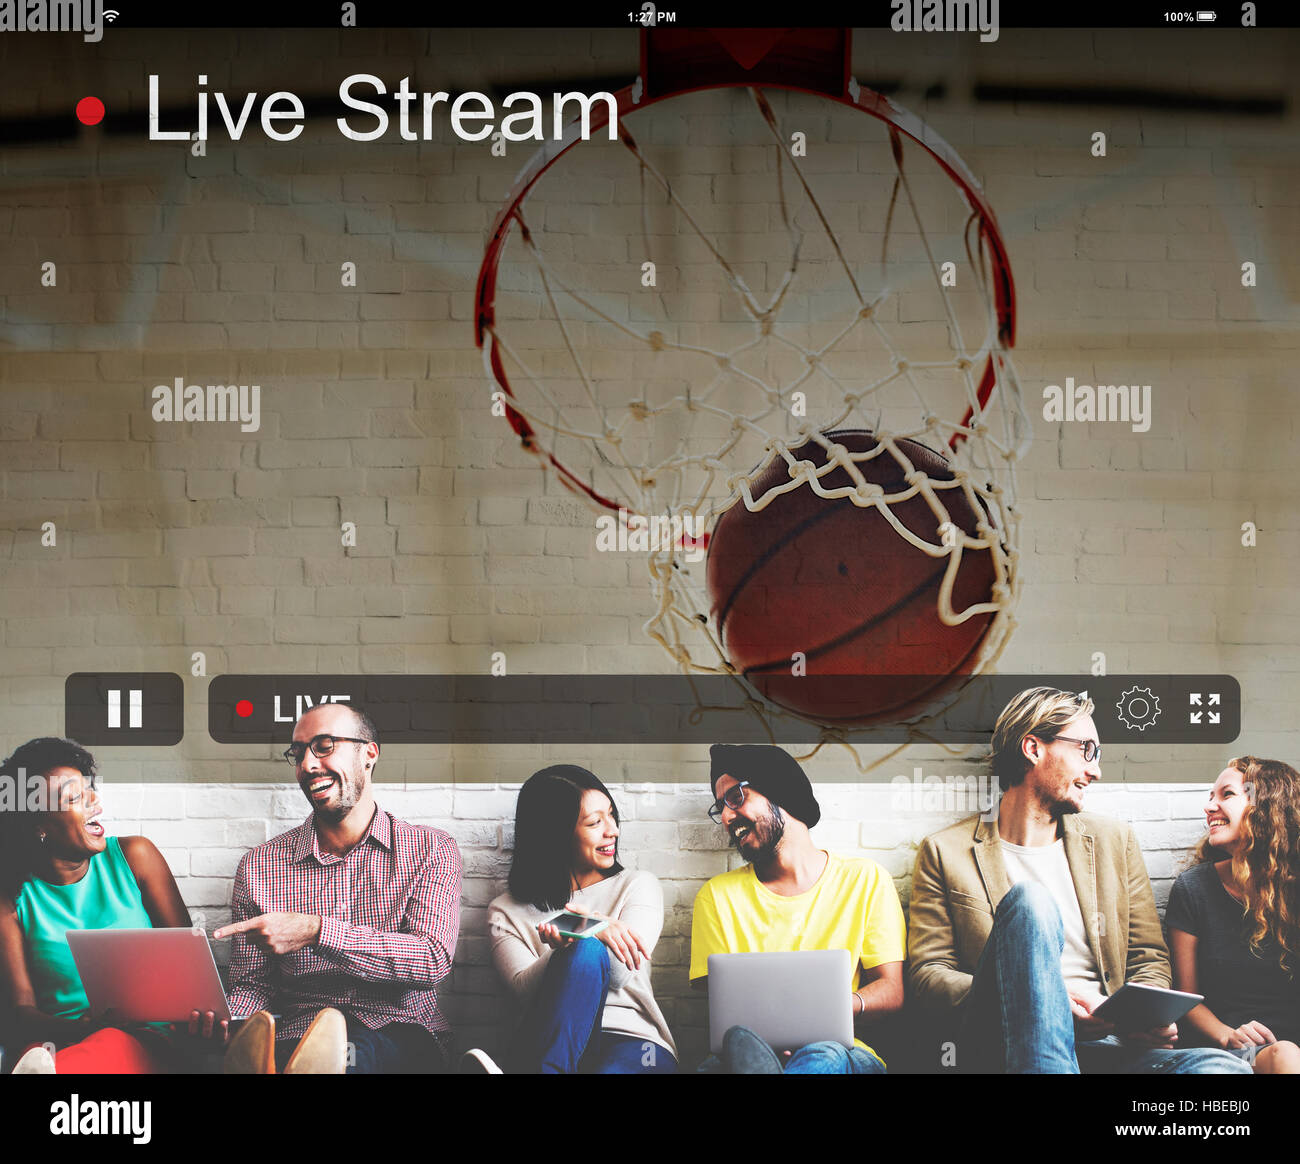 Live Streaming Video multimediale Concept Foto Stock